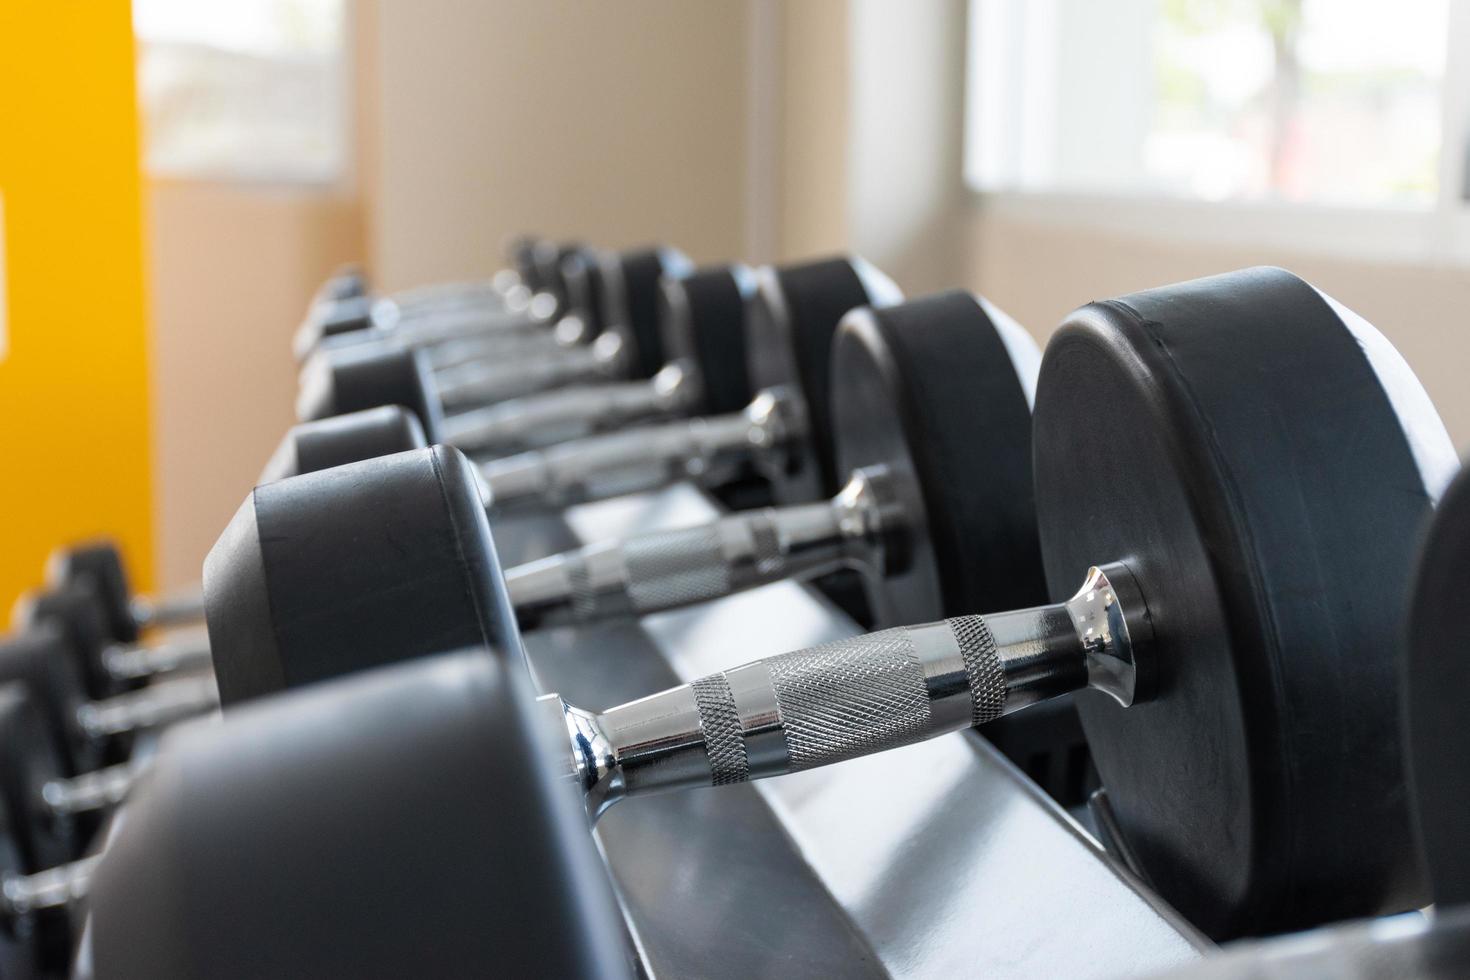 Black dumbbell set on rack close up in sport fitness center weight training equipment concept photo